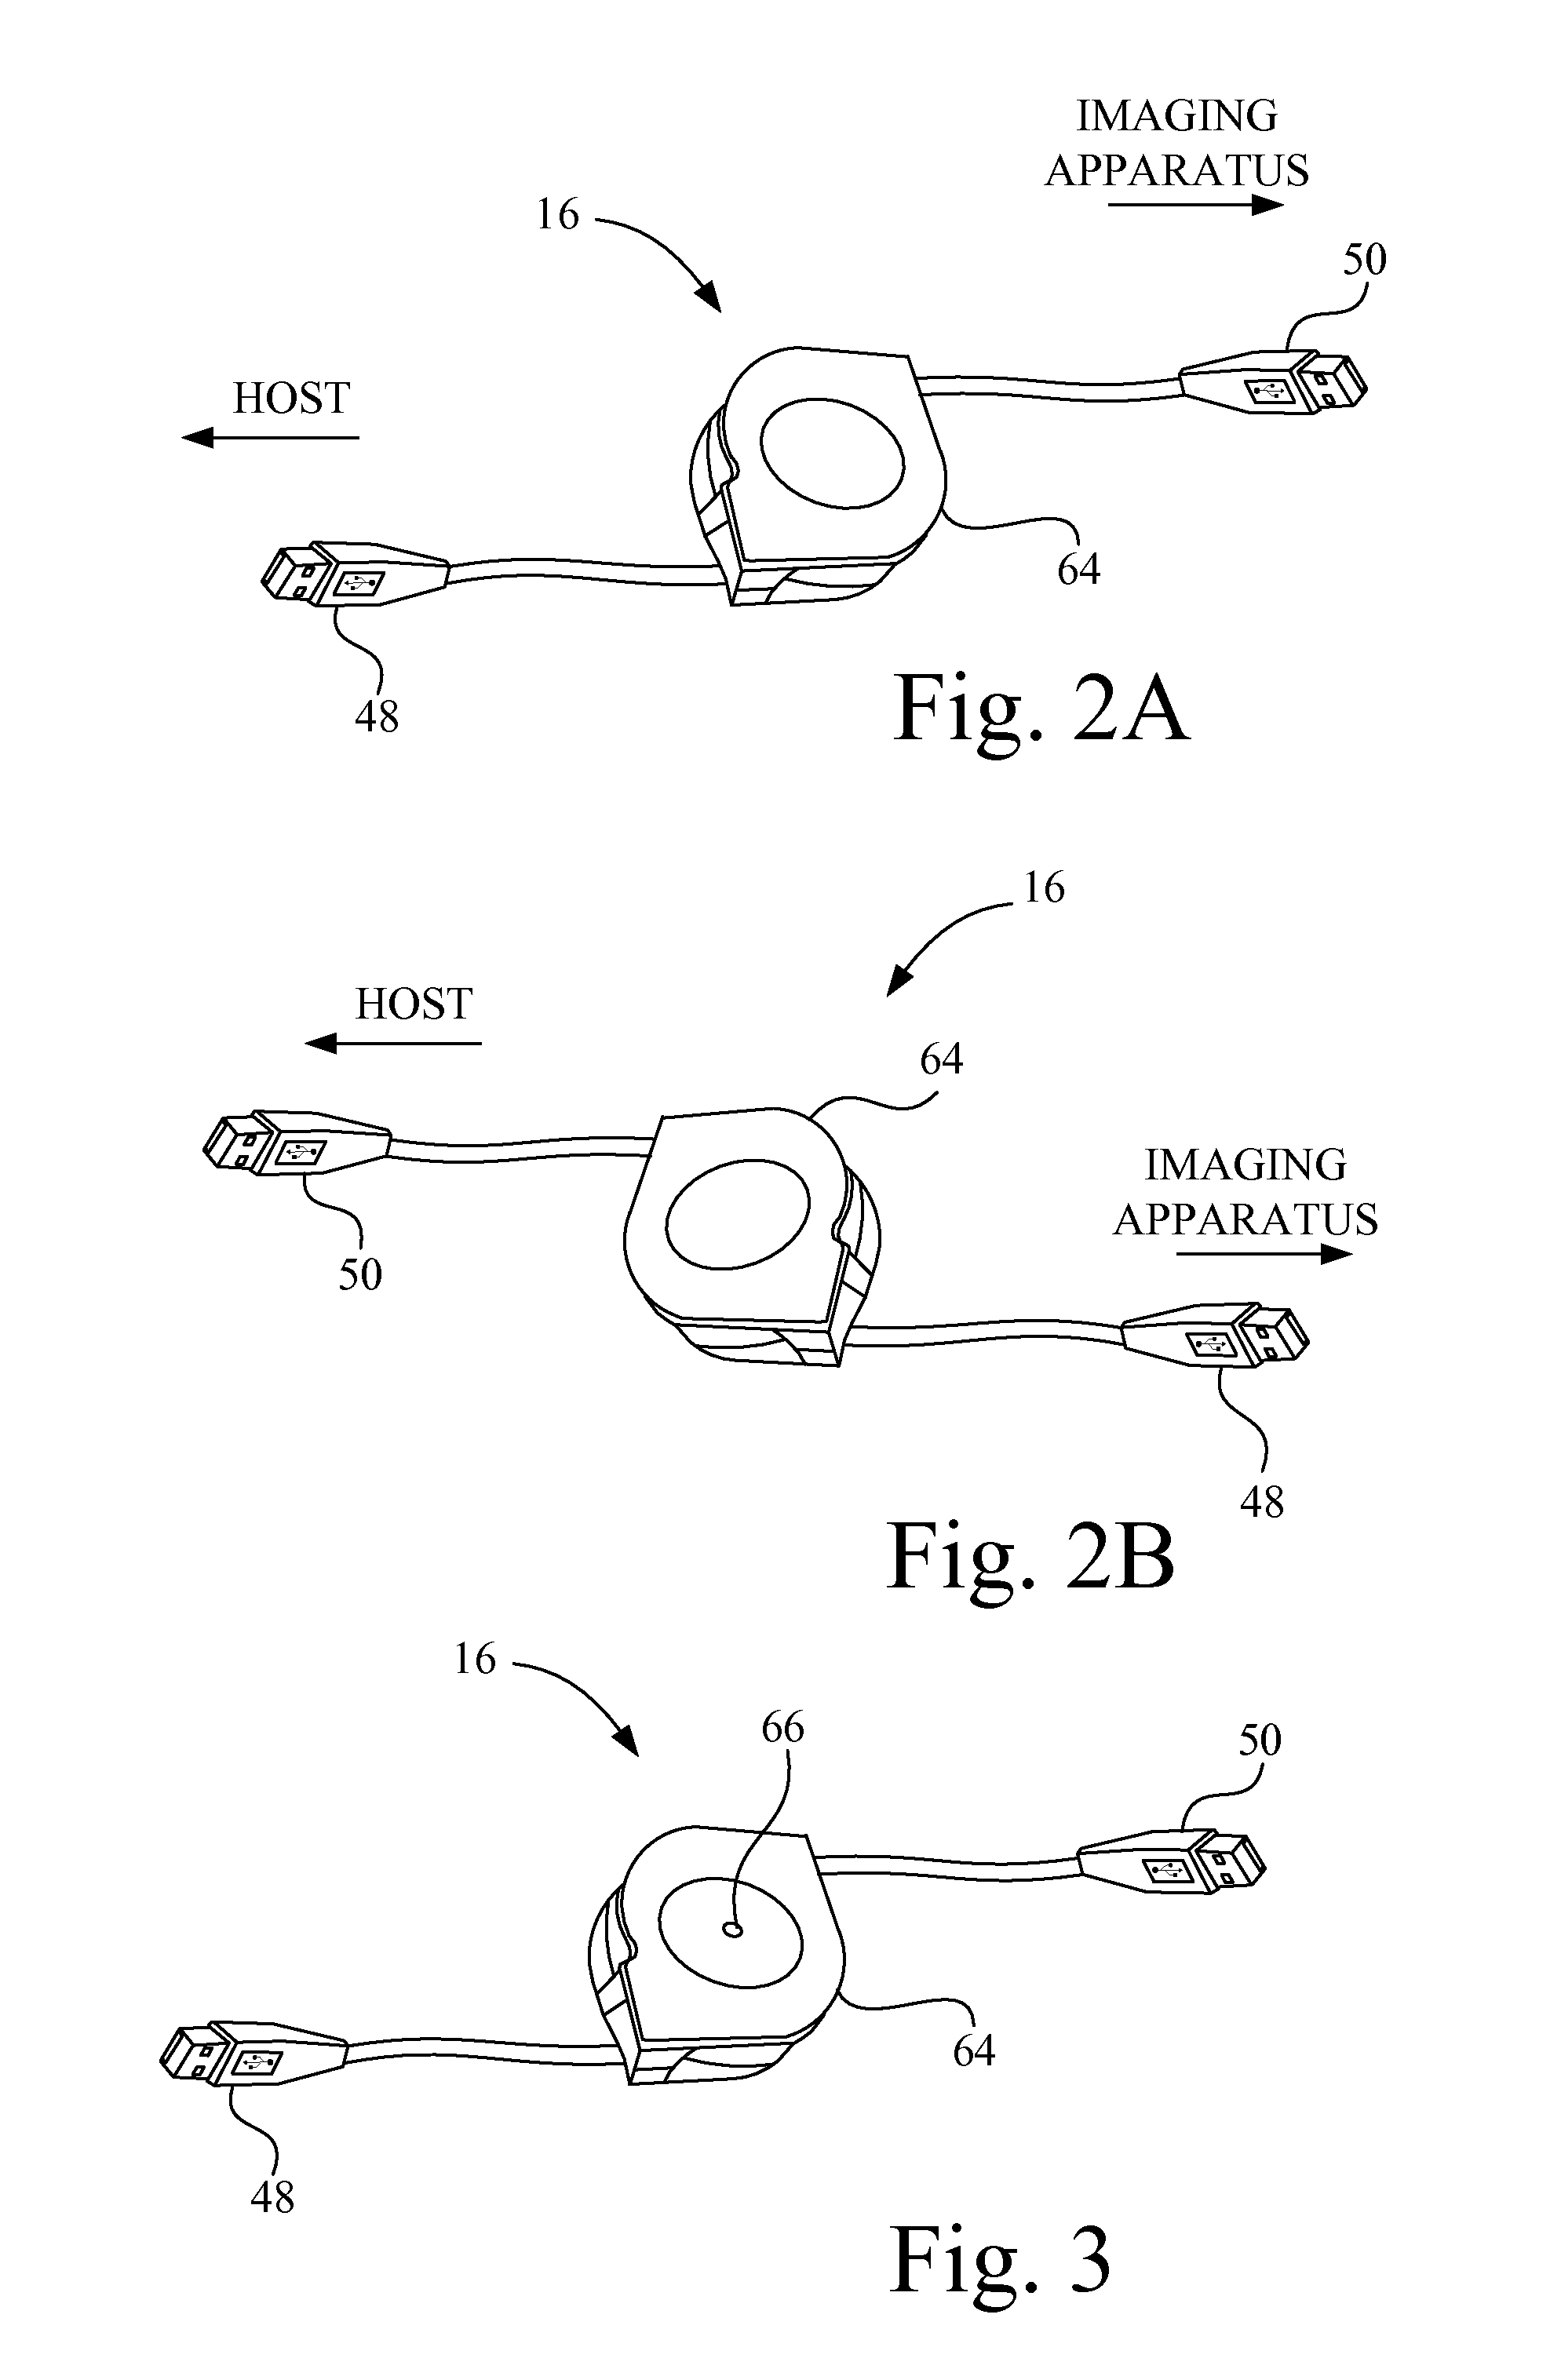 Interface Device for Printing From a Host to an Imaging Apparatus Having a Pictbridge Port